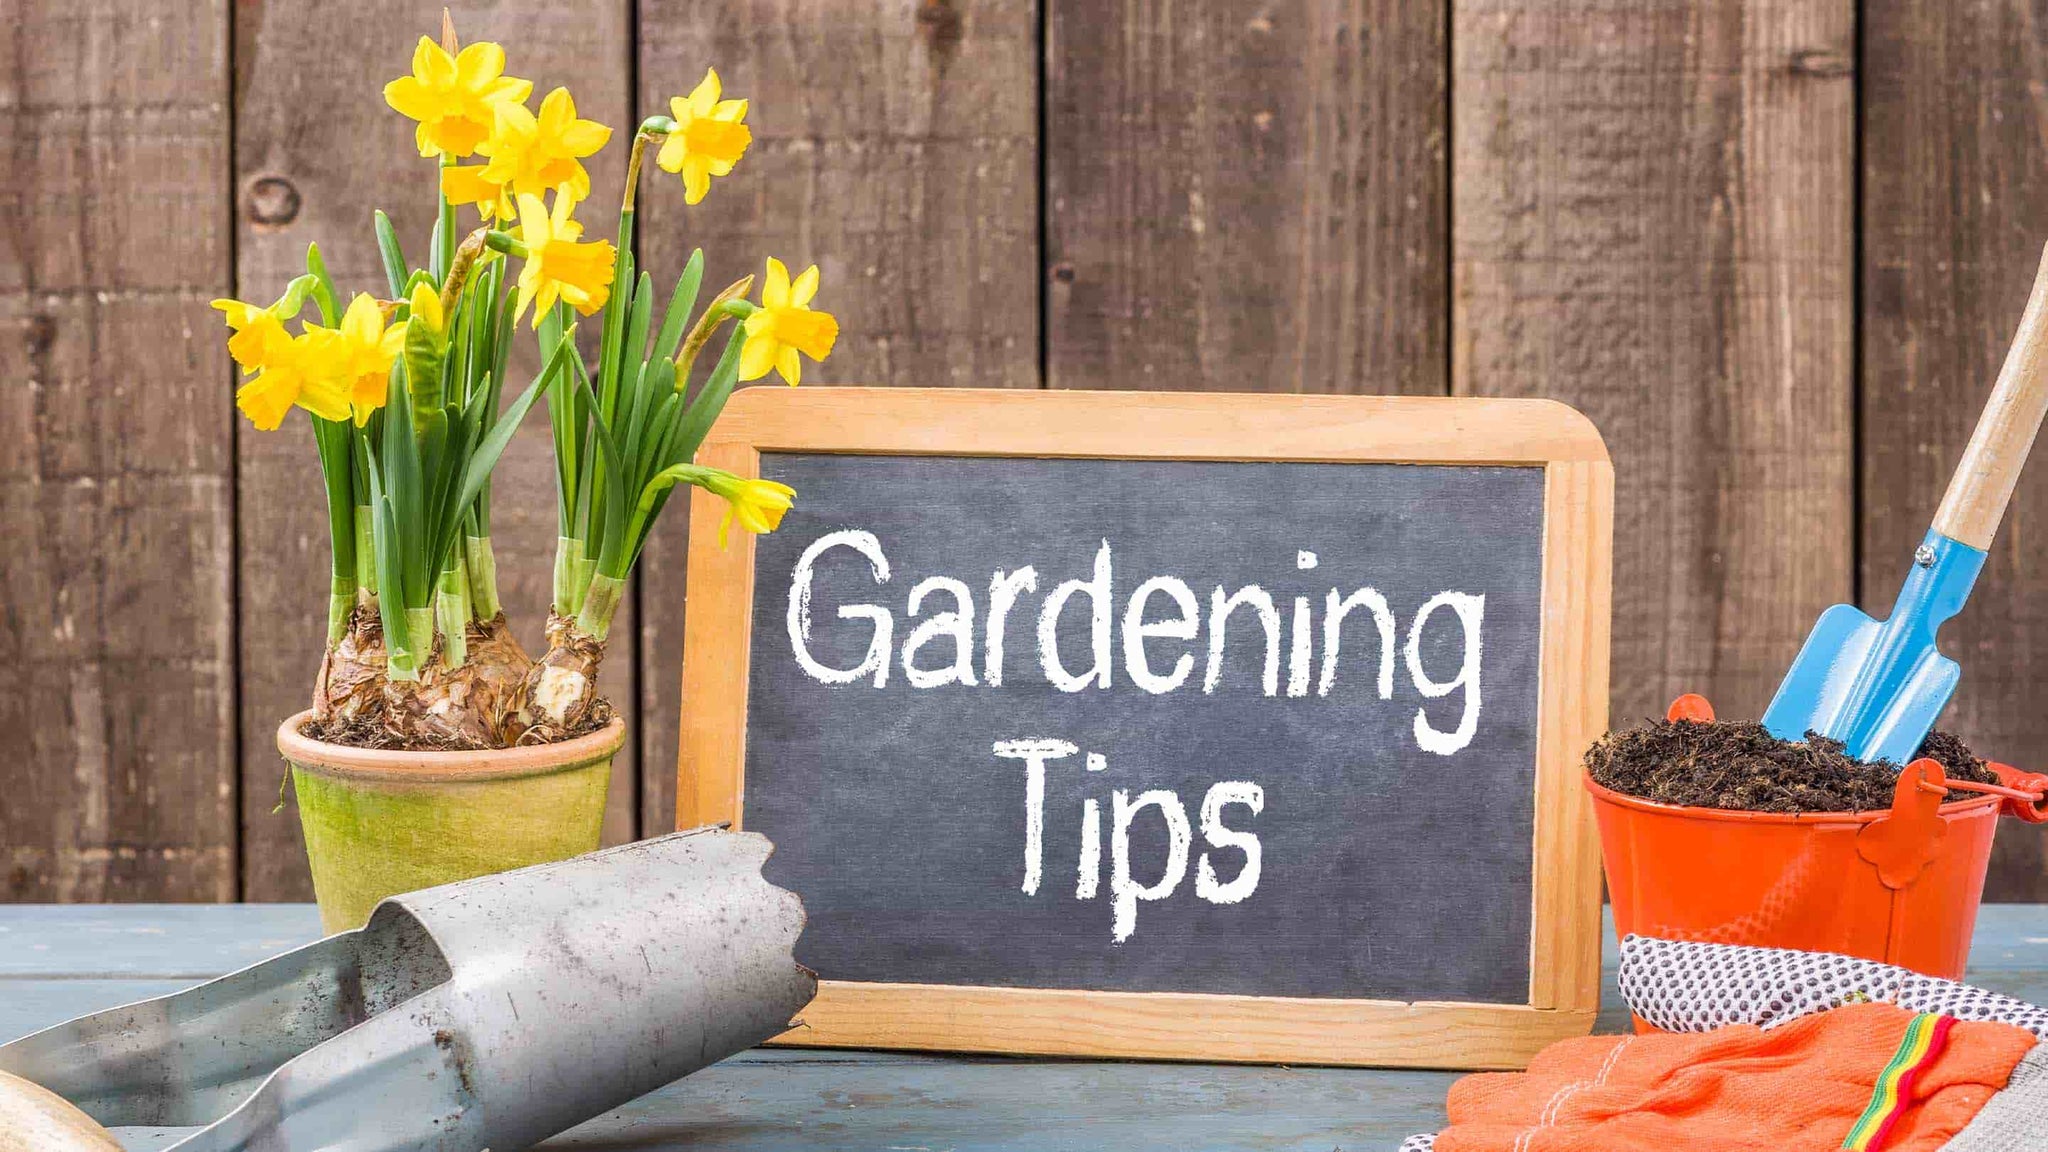 Gardening tips wrote on a chalkboard on a table with a potted flower and gardening tools on a table.